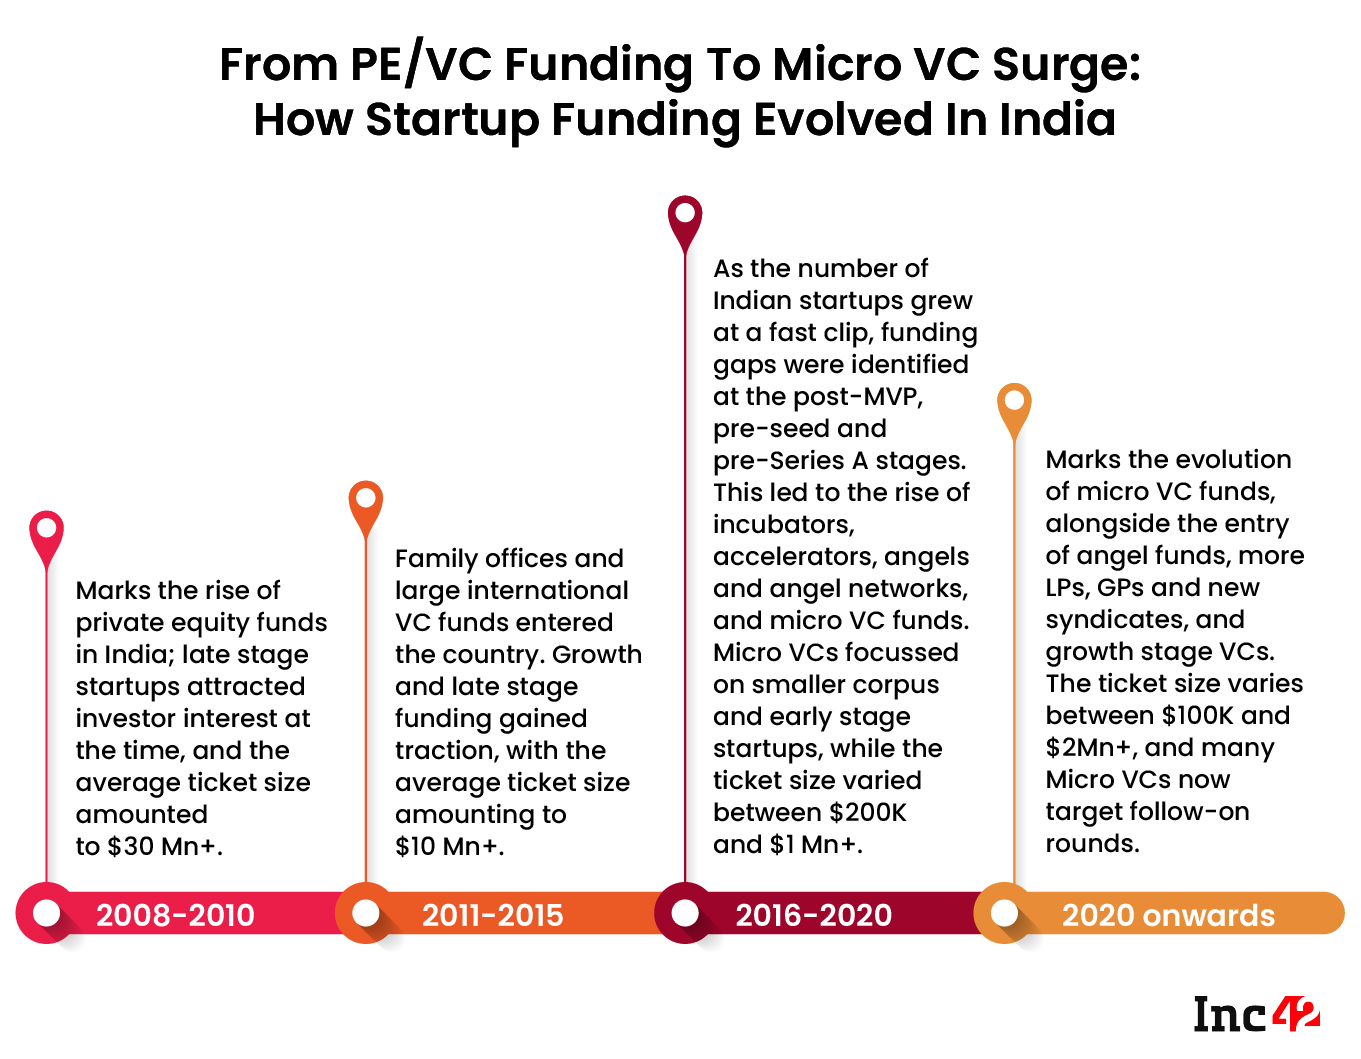 Will Micro VCs Bring A Paradigm Shift In Indian Startup Funding? 